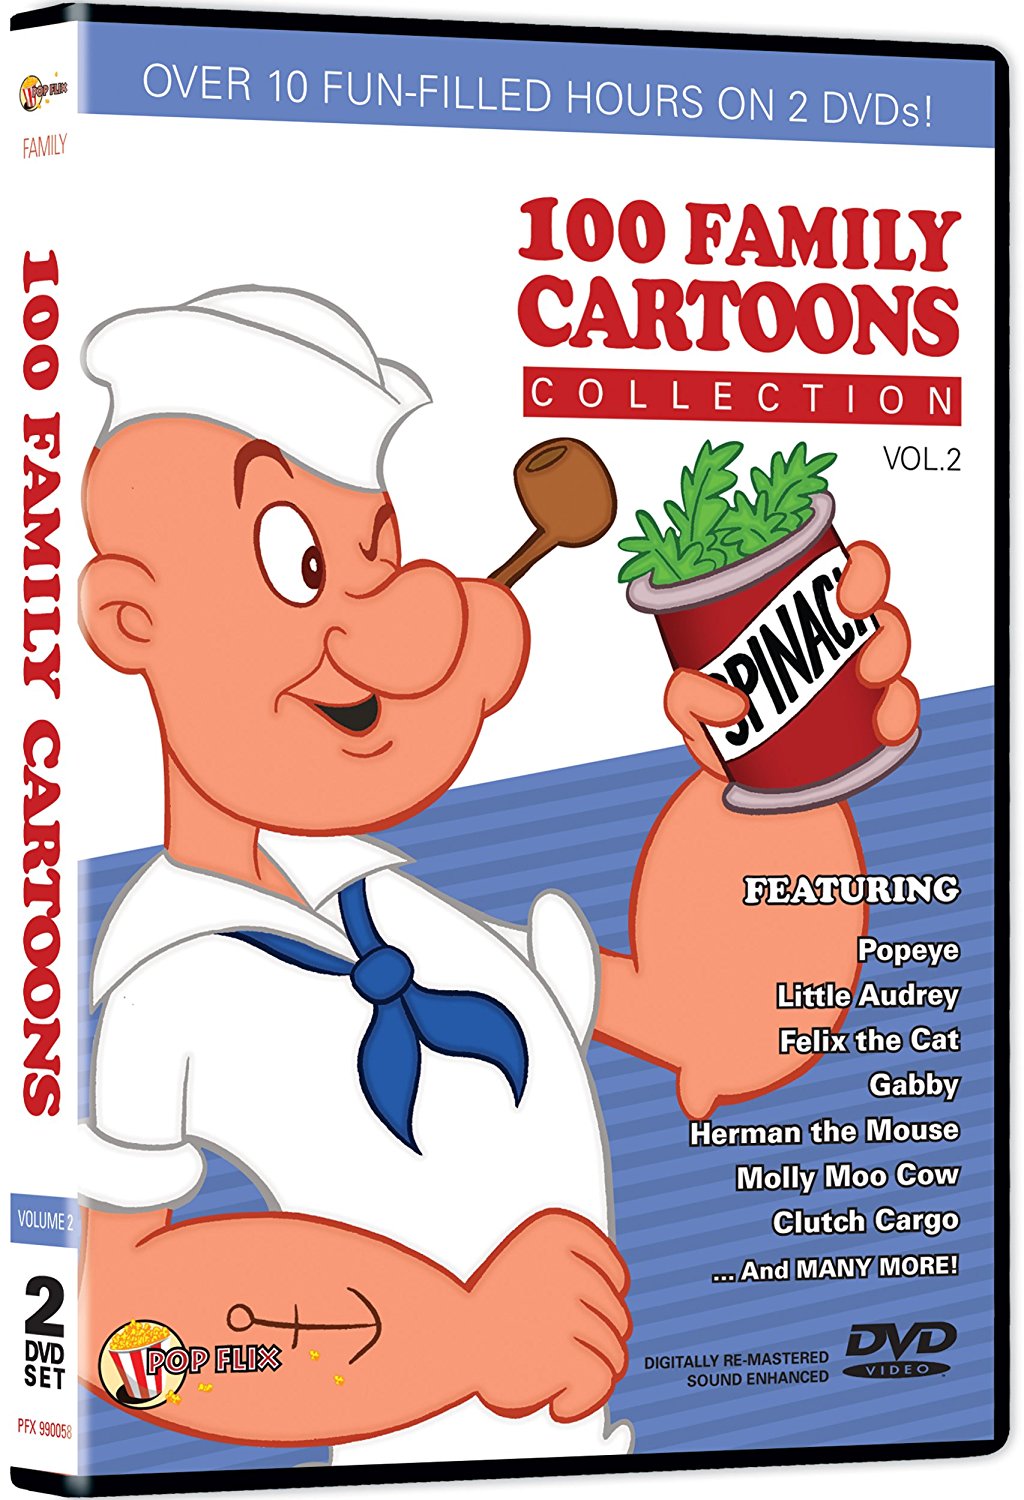 100 Family Cartoons Collection Dvd Set - Popeye, Felix The Cat, Gabby Little Audrey And Many More by Various Artists